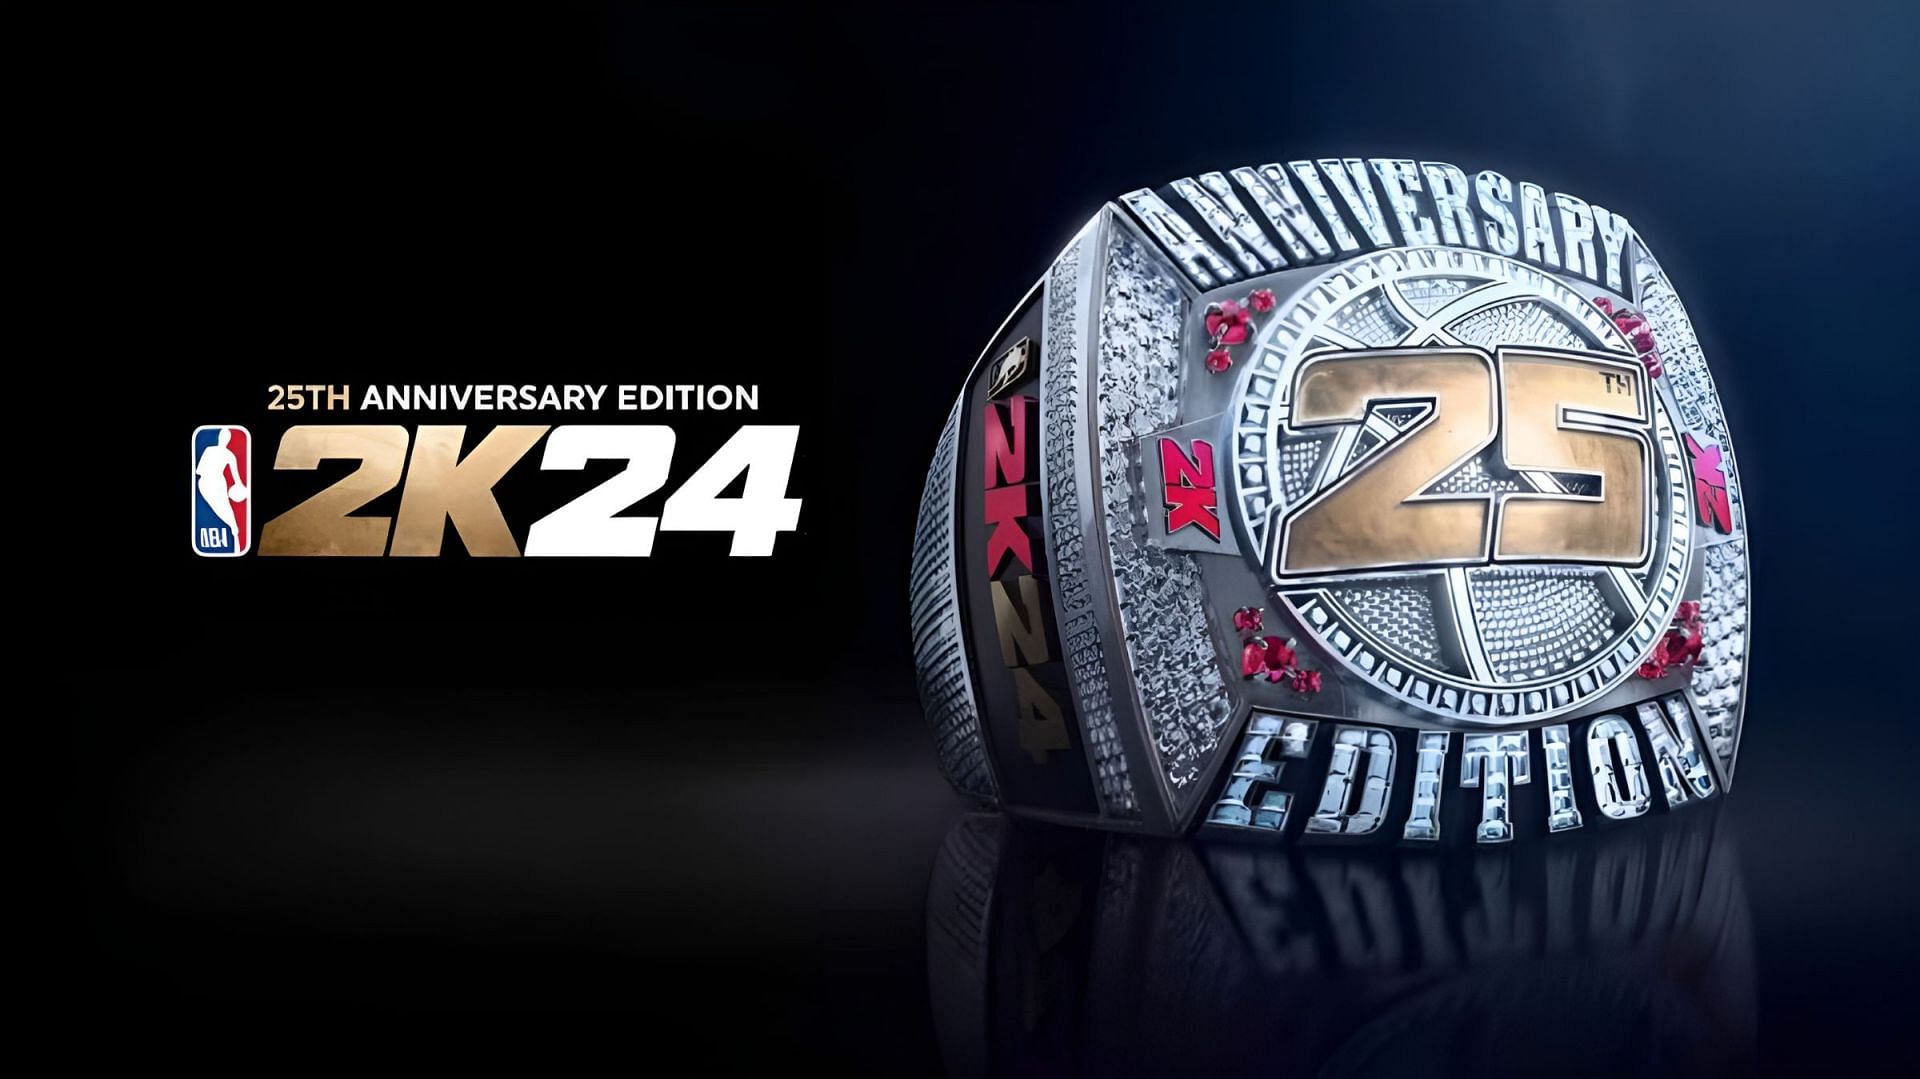 What is the NBA 2K24 25th Anniversary Edition? Exploring the differences